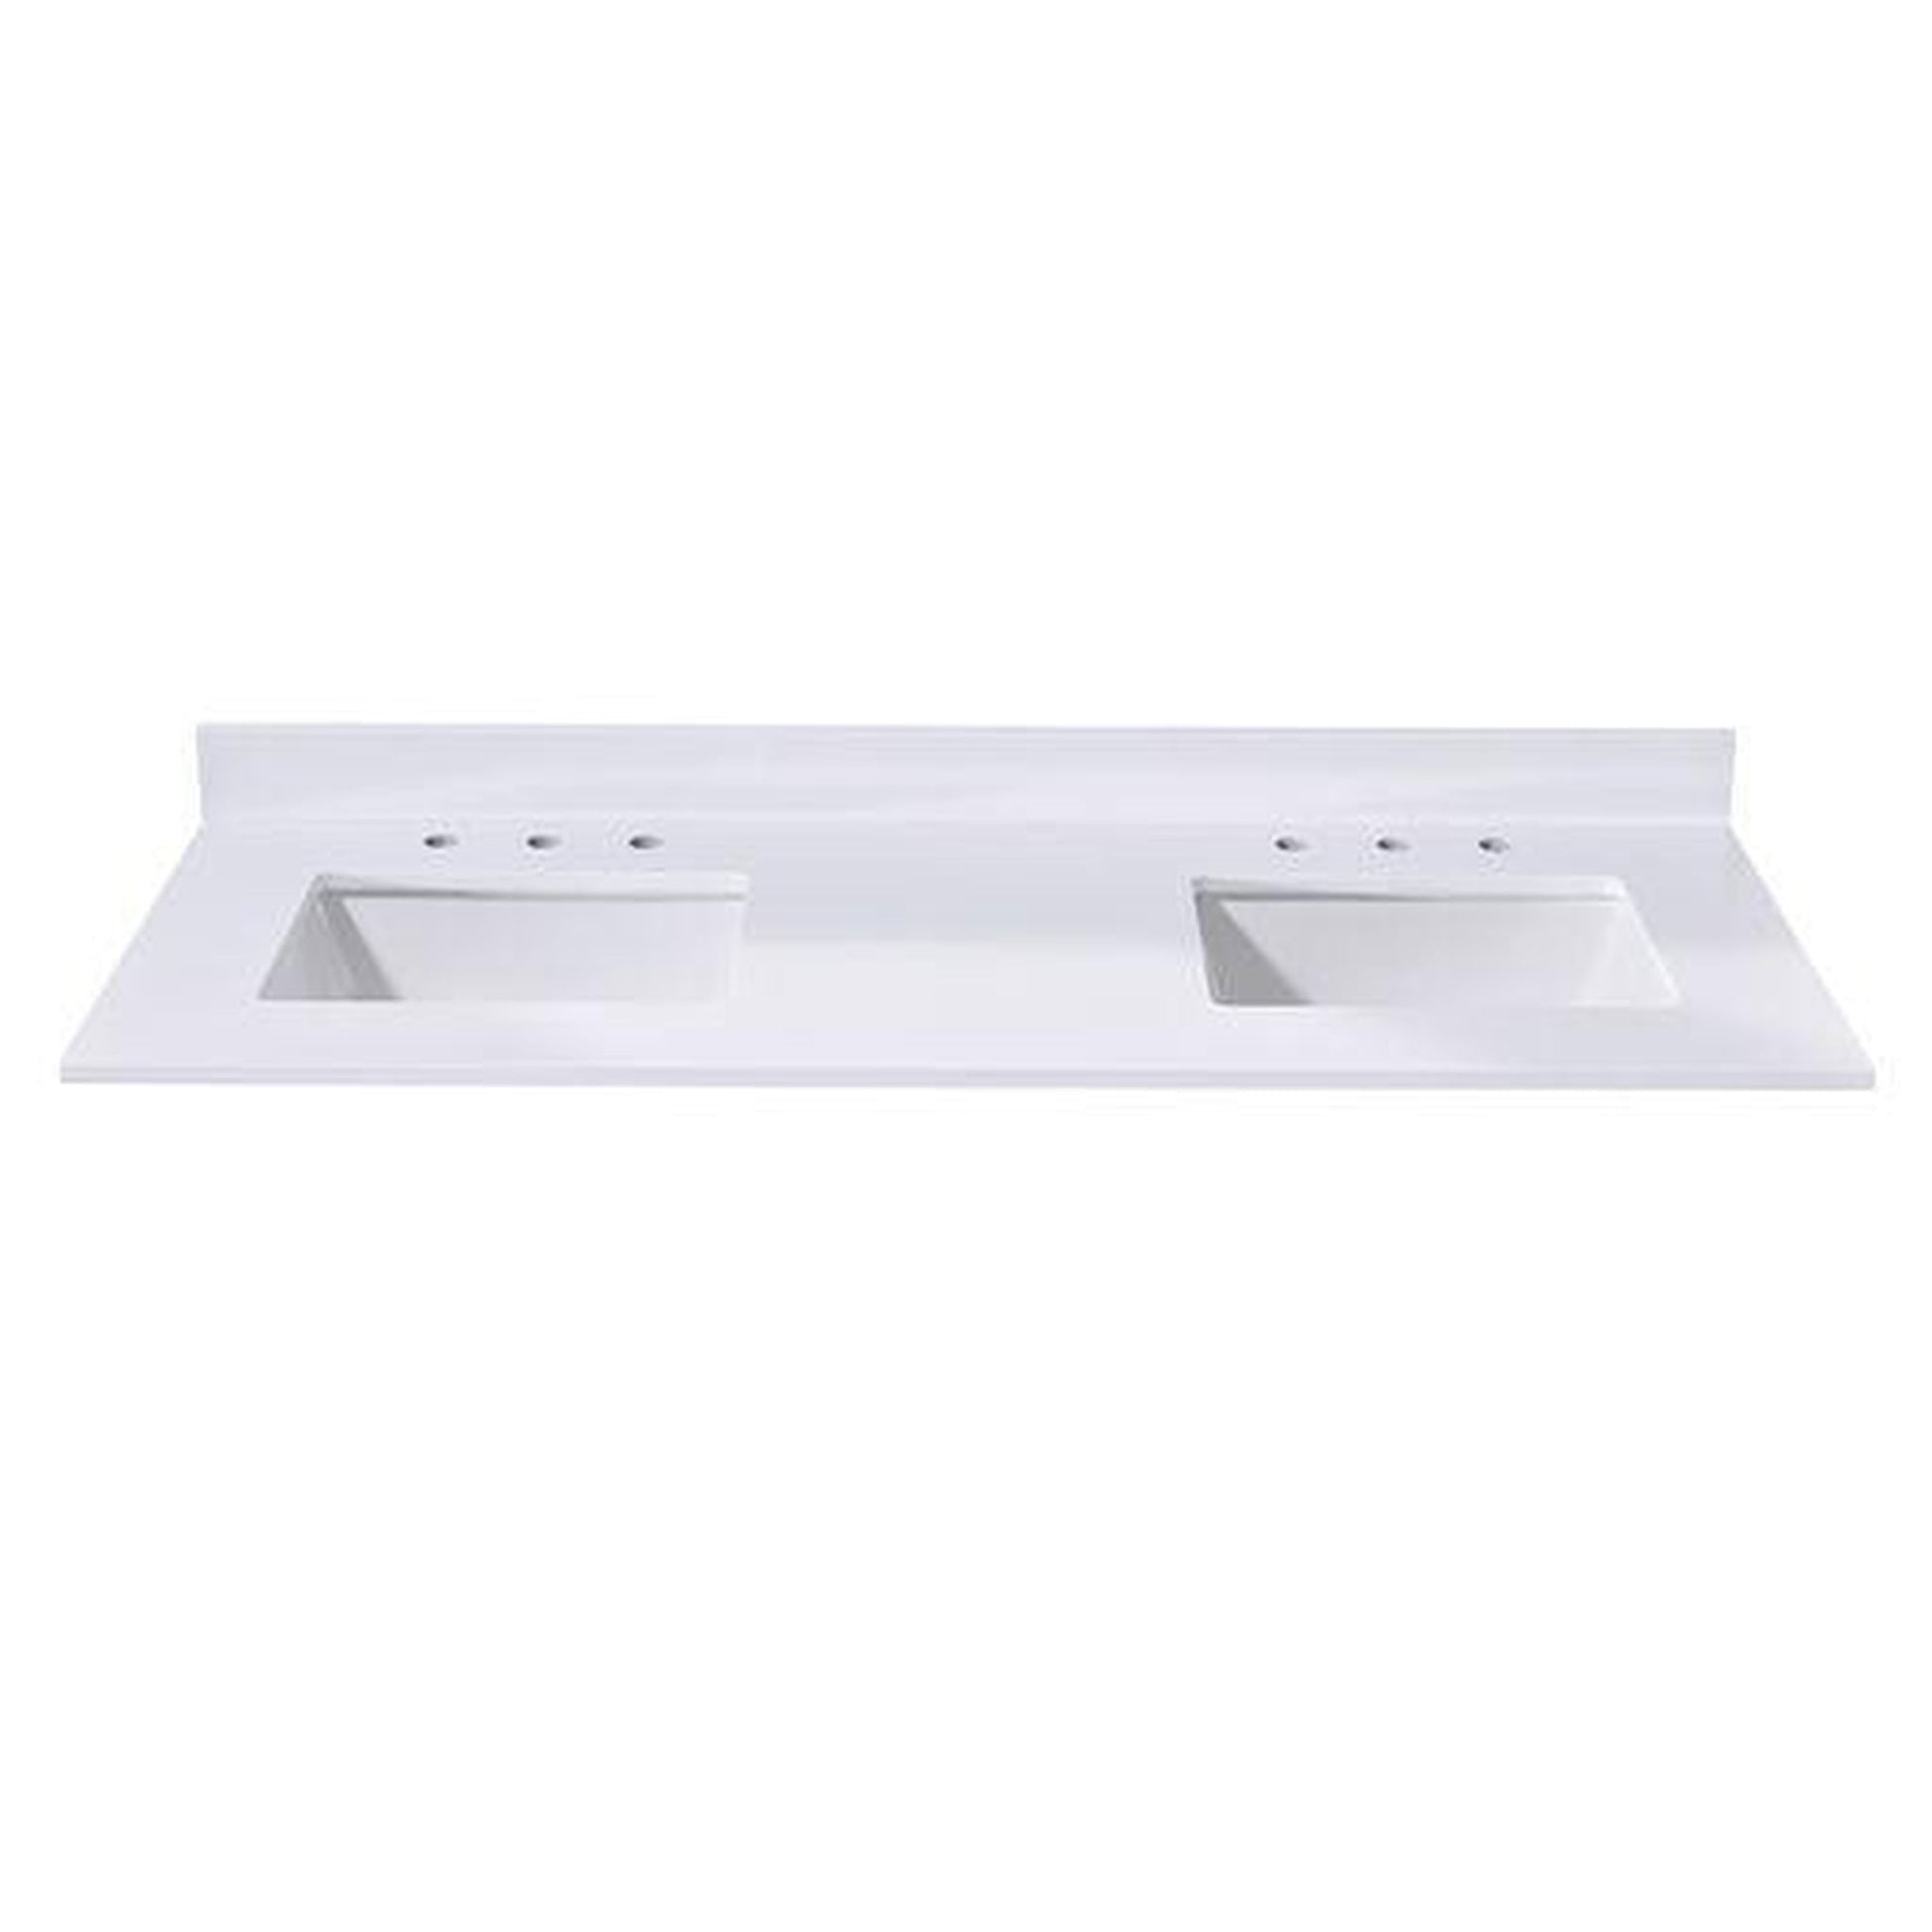 Altair Andalo 61" x 22" Snow White Composite Stone Bathroom Vanity Top With Double White SInk